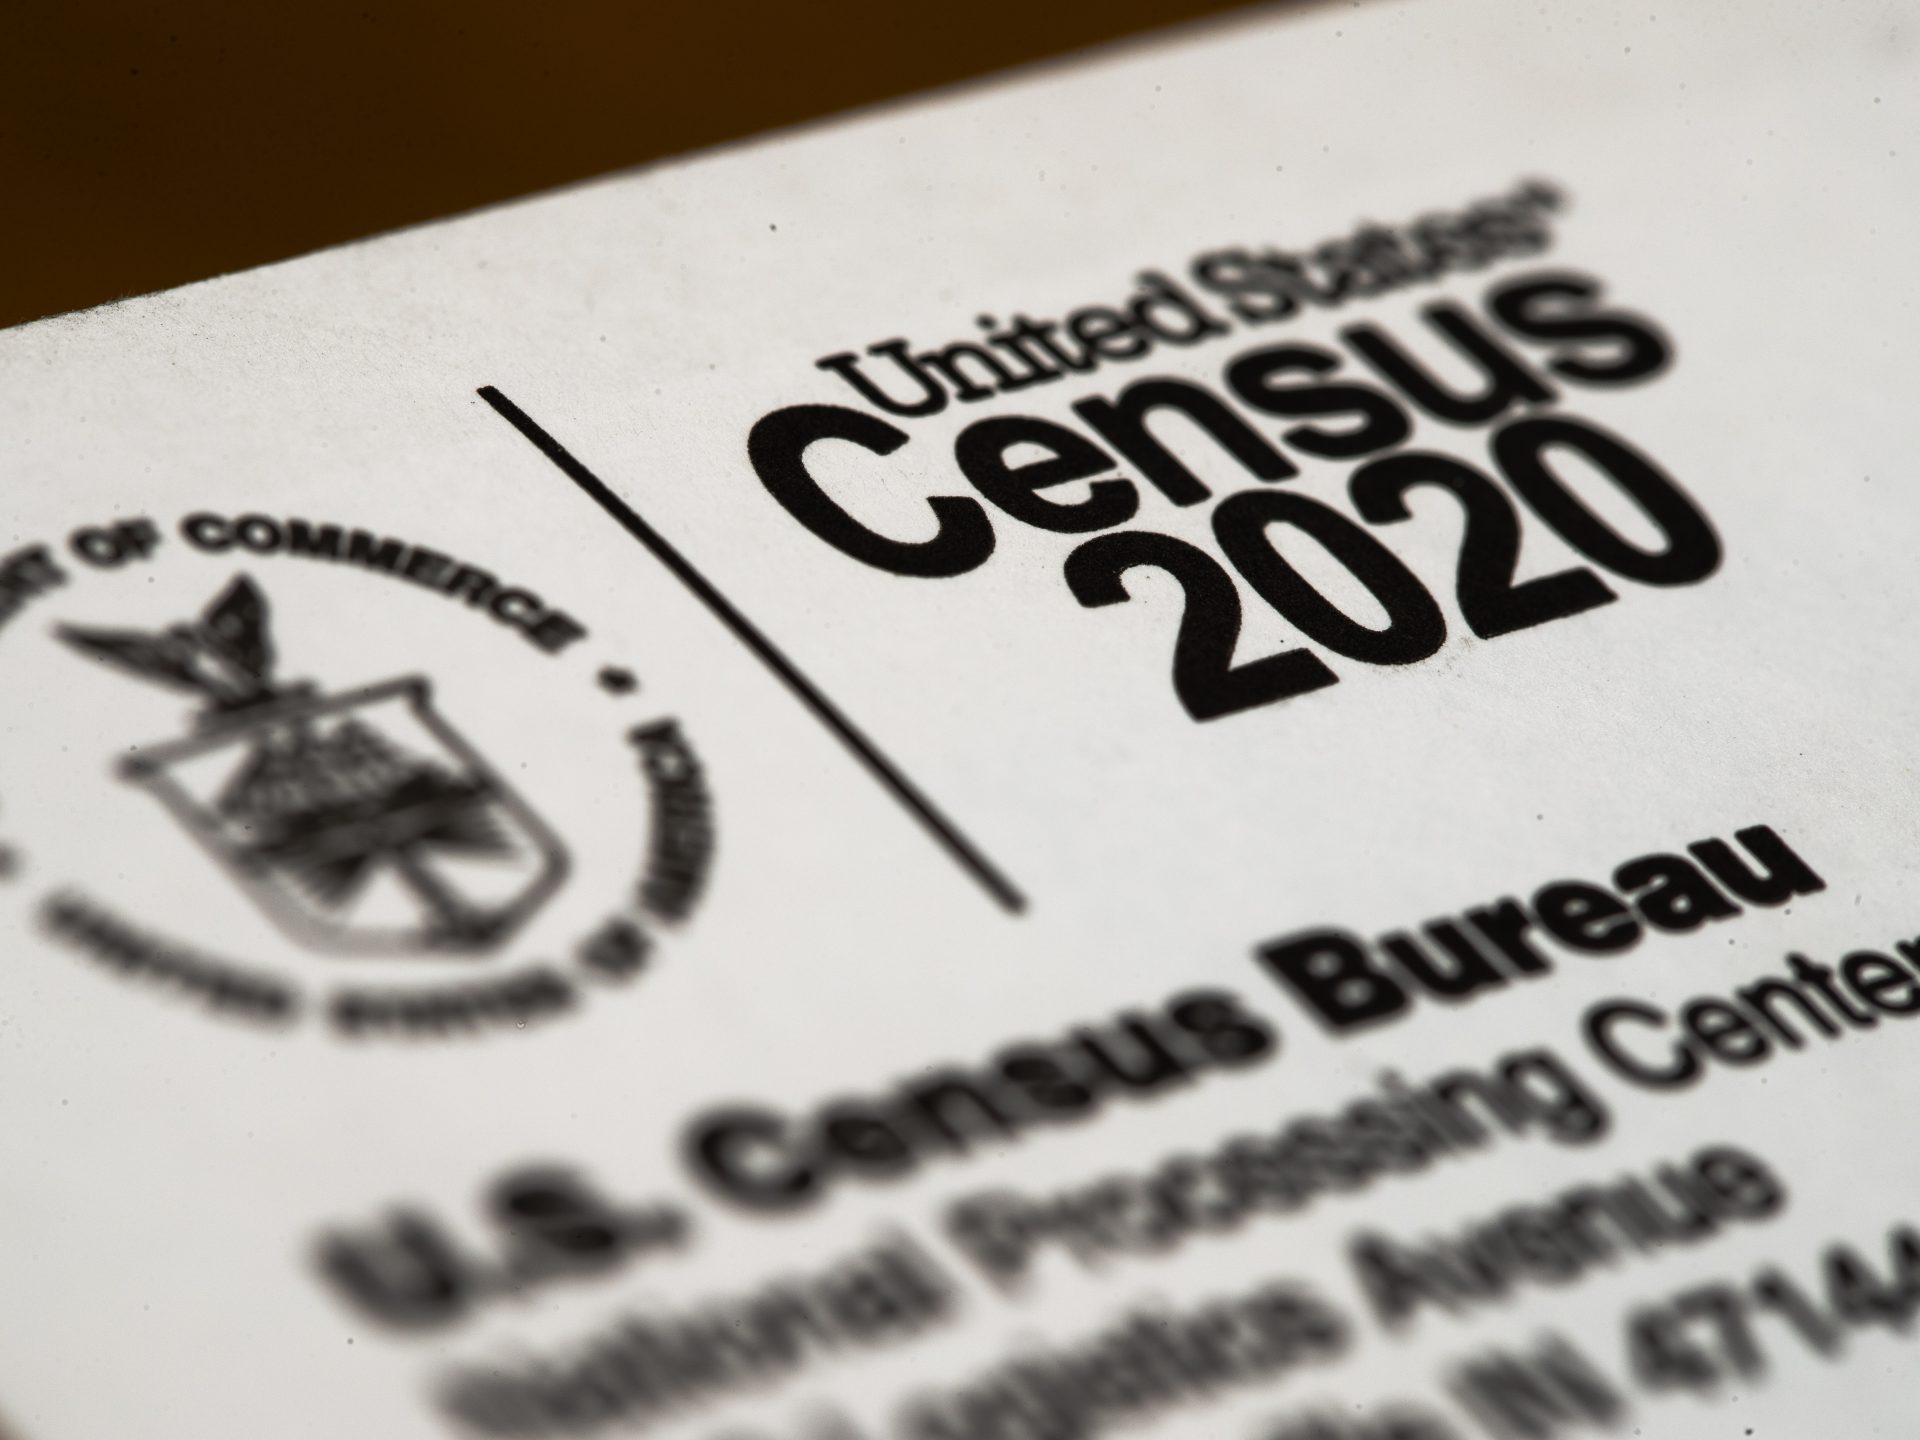 The Census Bureau says it will continue its relaunch of limited field operations for the 2020 census next week in some rural communities in nine states.